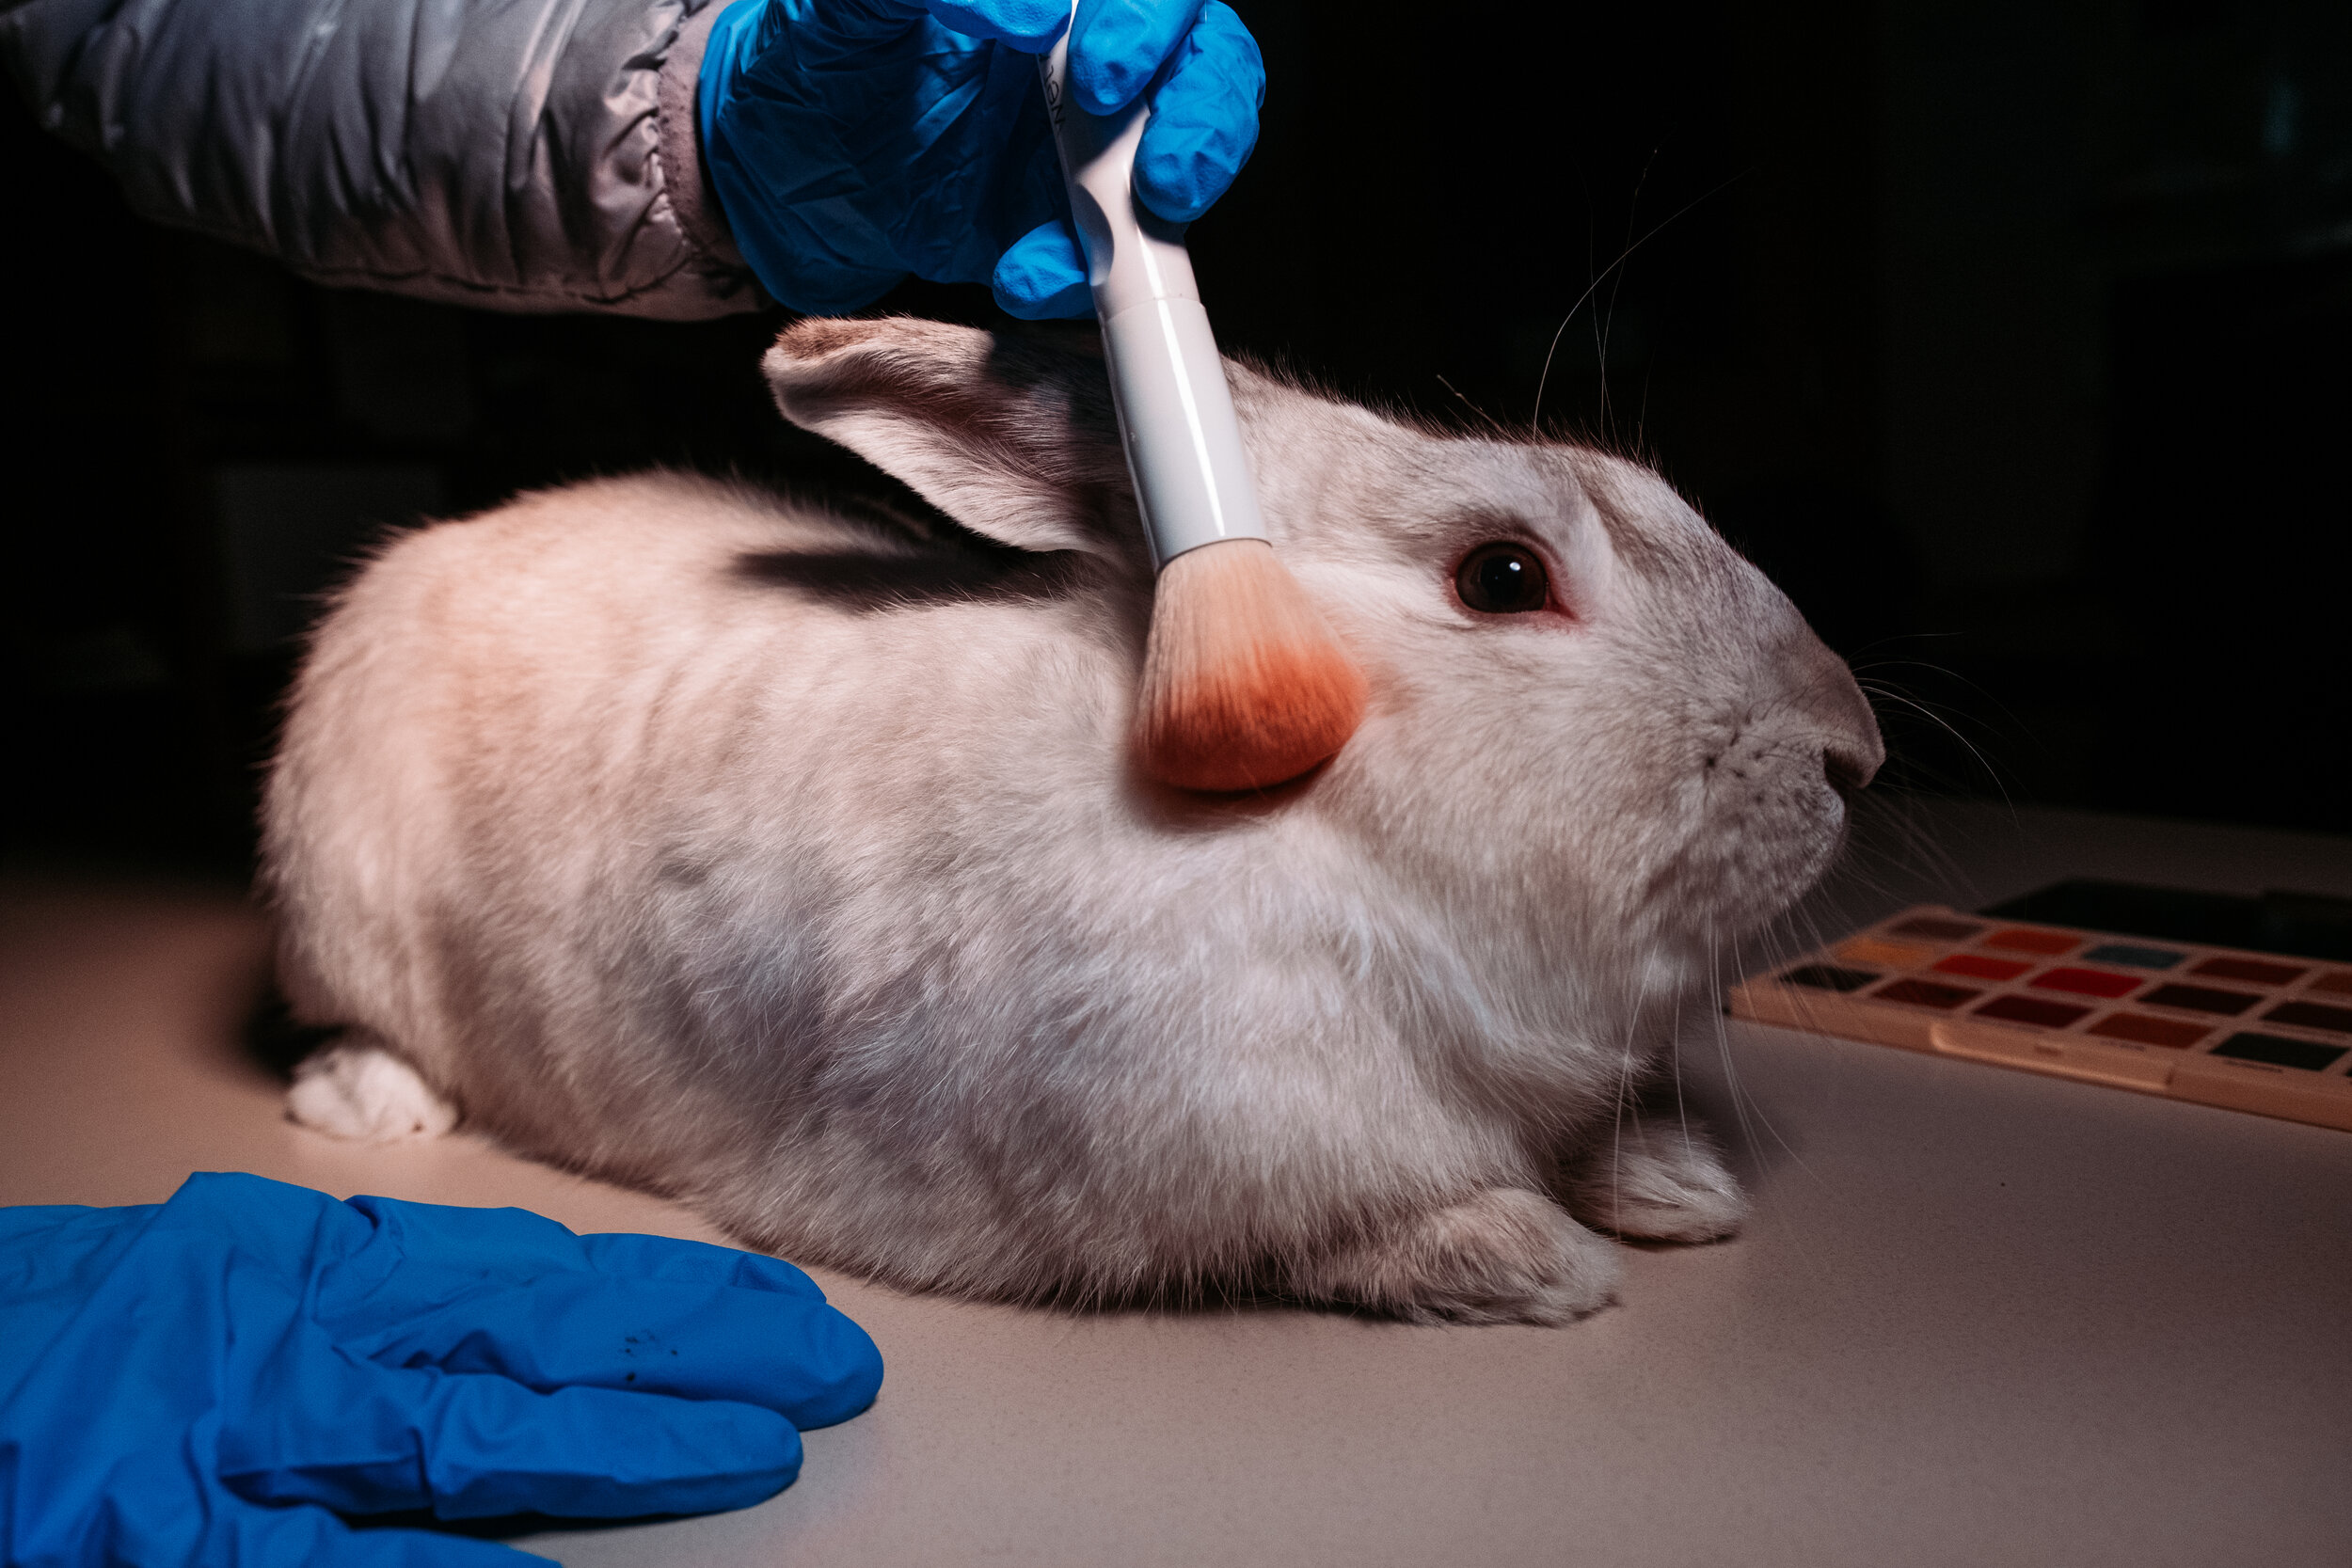 medical research testing animals